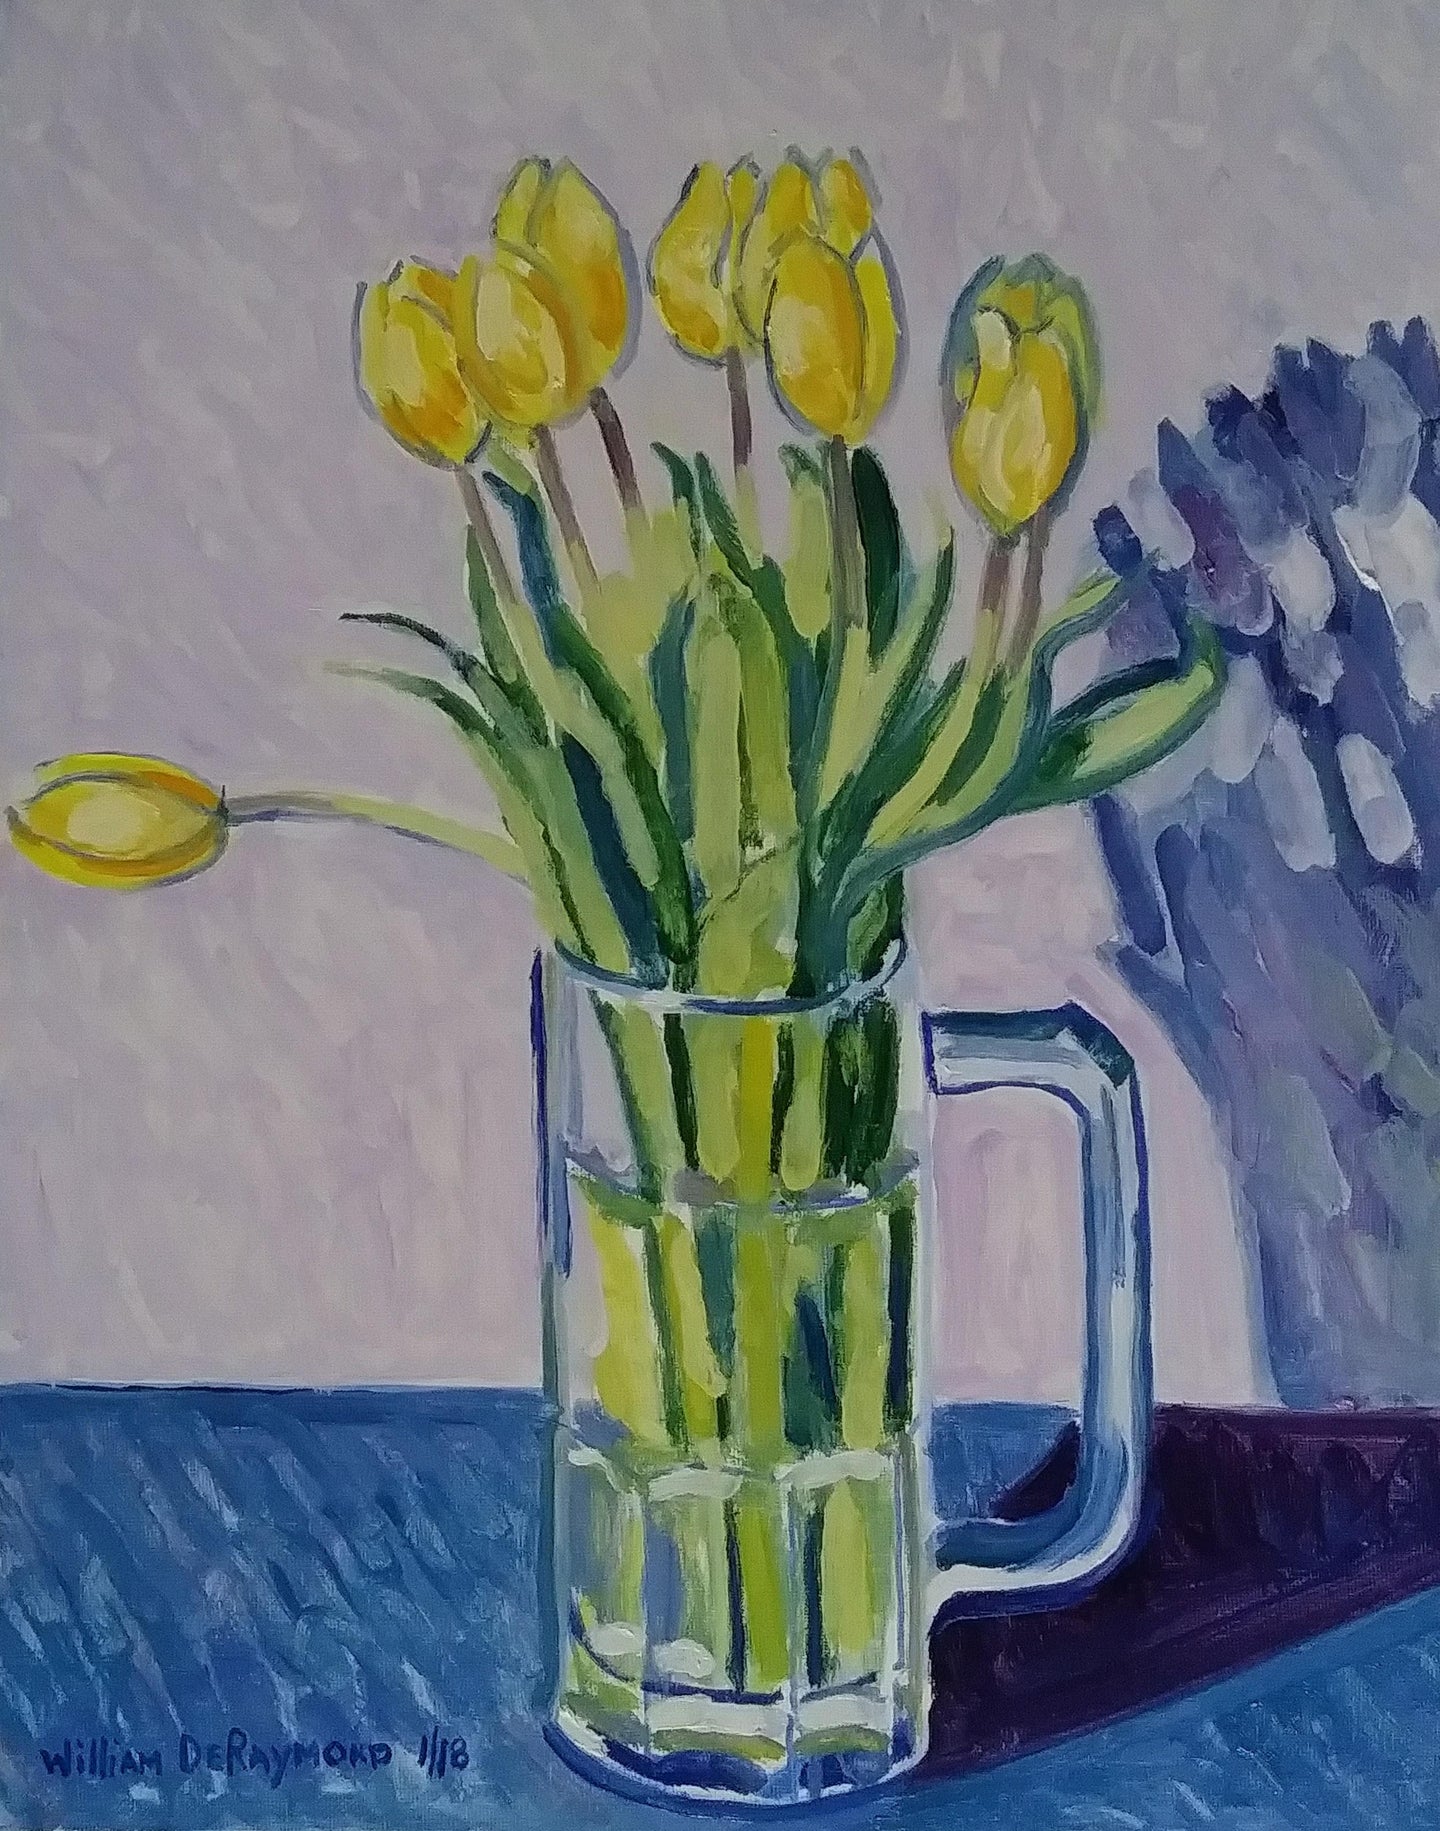 #fineart #painting #art composition with yellow tulips, 16